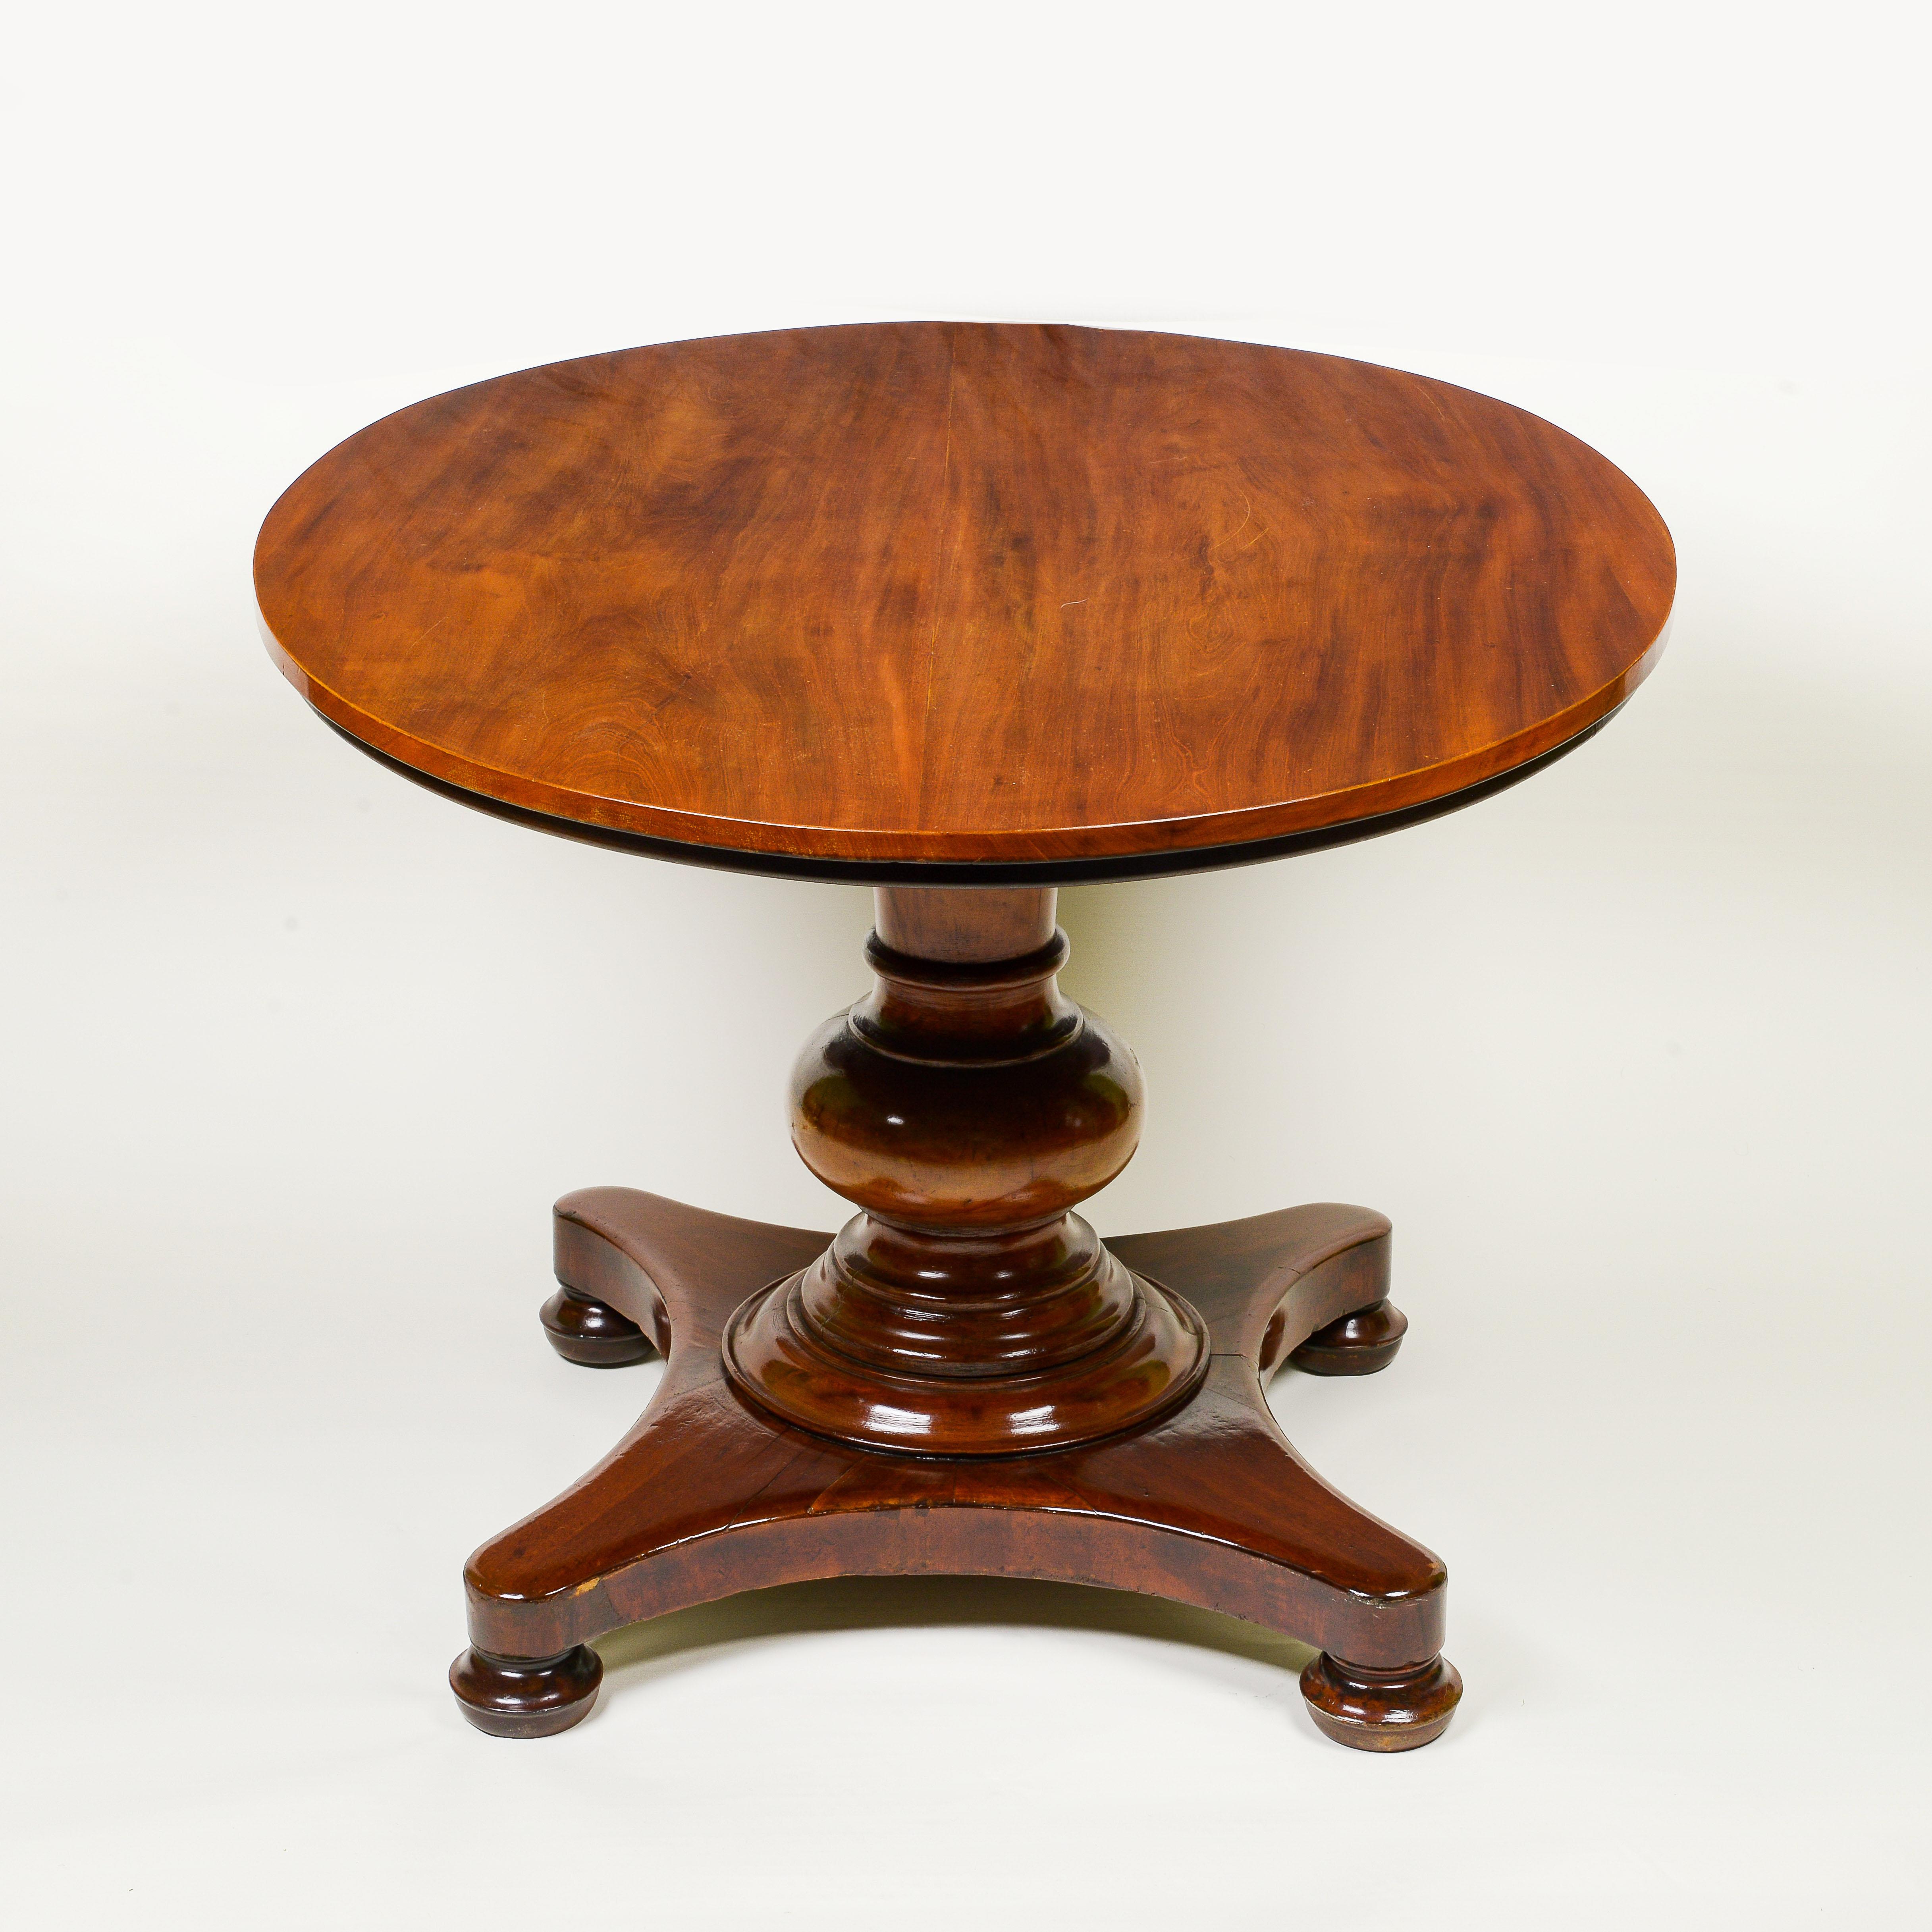 The oval tilt-top over a bold turned support on scroll-form feet.